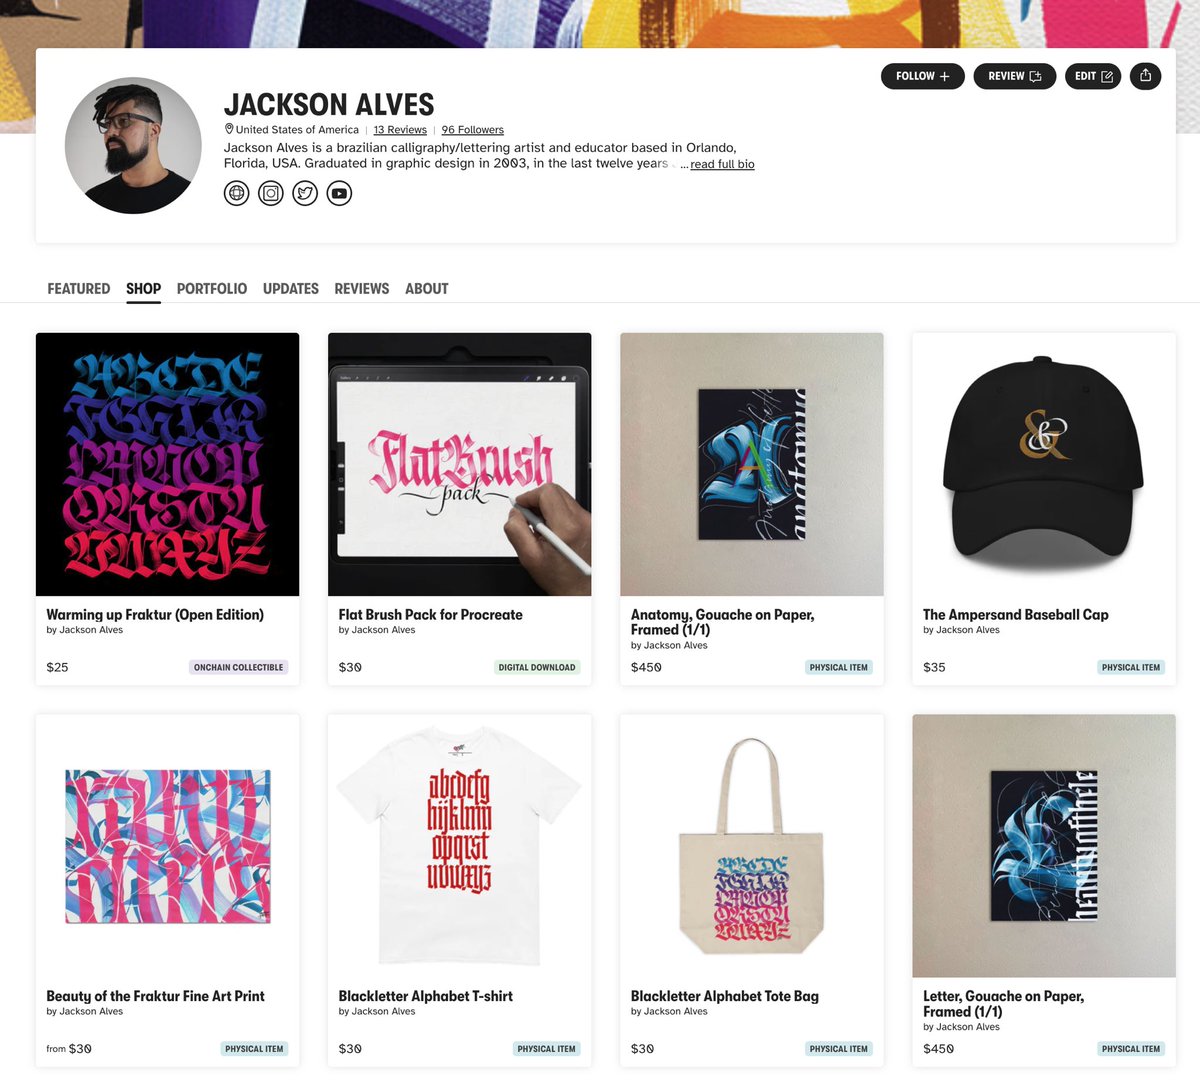 A new week means a new HUG Artist Storefront, and I’m thrilled to share @letterjack is officially open for business! Jackson Alves is an unparalleled calligraphy/lettering artist who shares his love of script through education. From his exclusive original paintings to